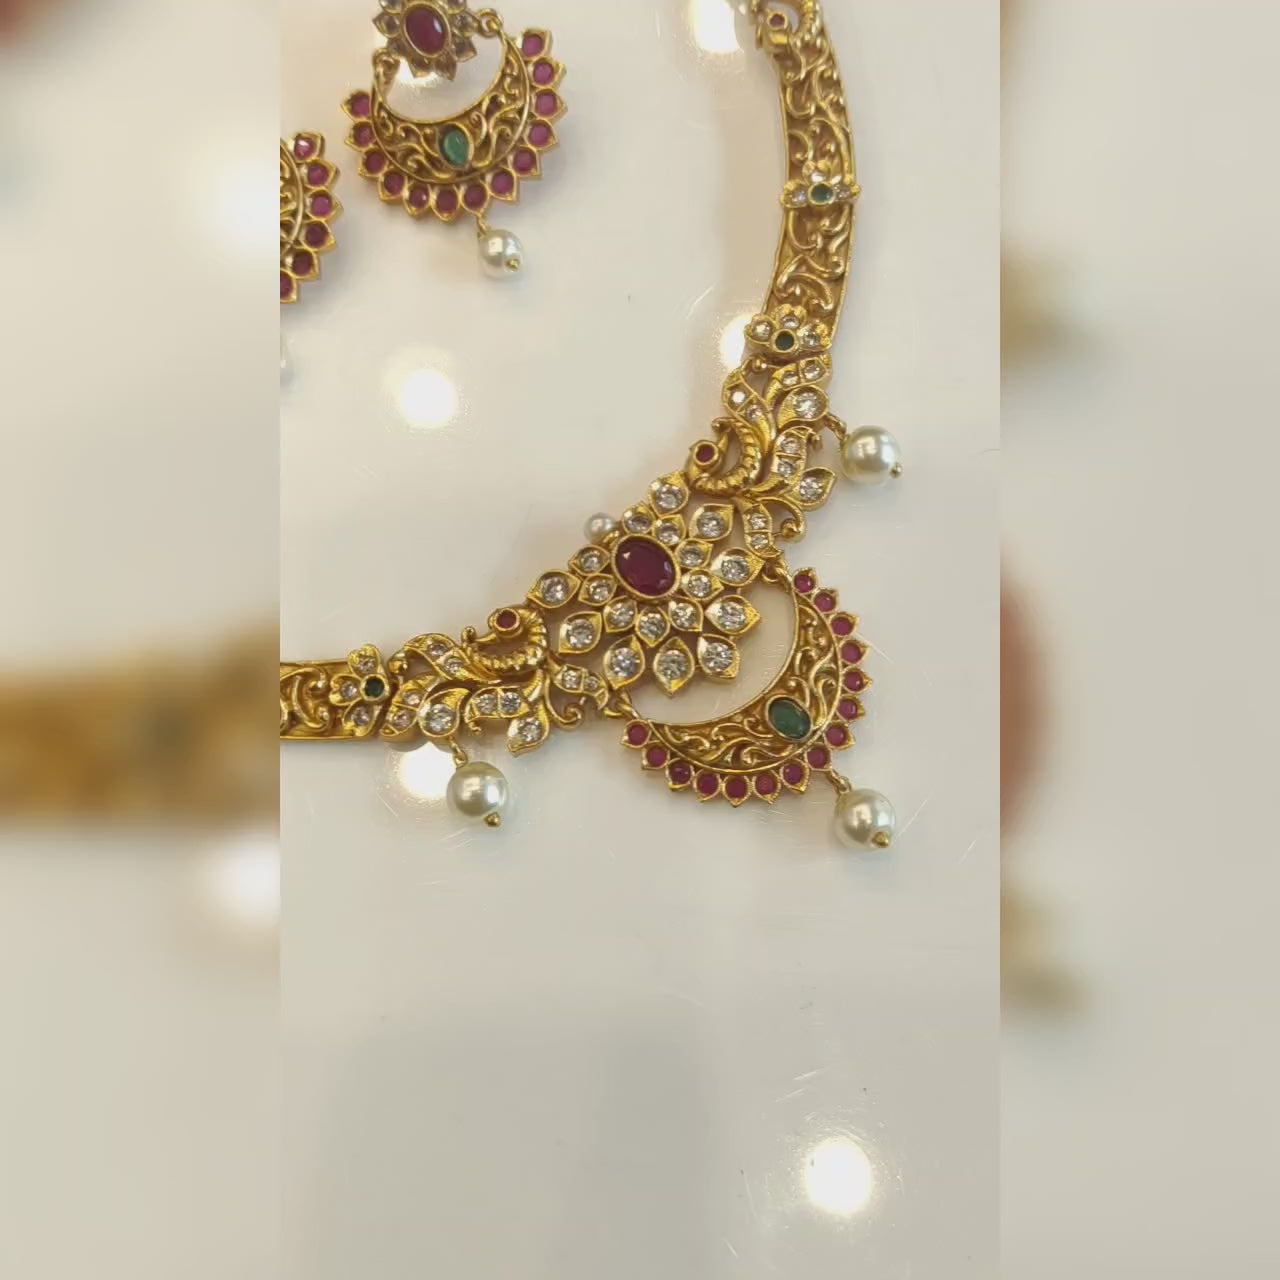 Latest gold kante designs/#22k simple kante necklace designs/#22Kgoldjewellerycollection/  - YouTube